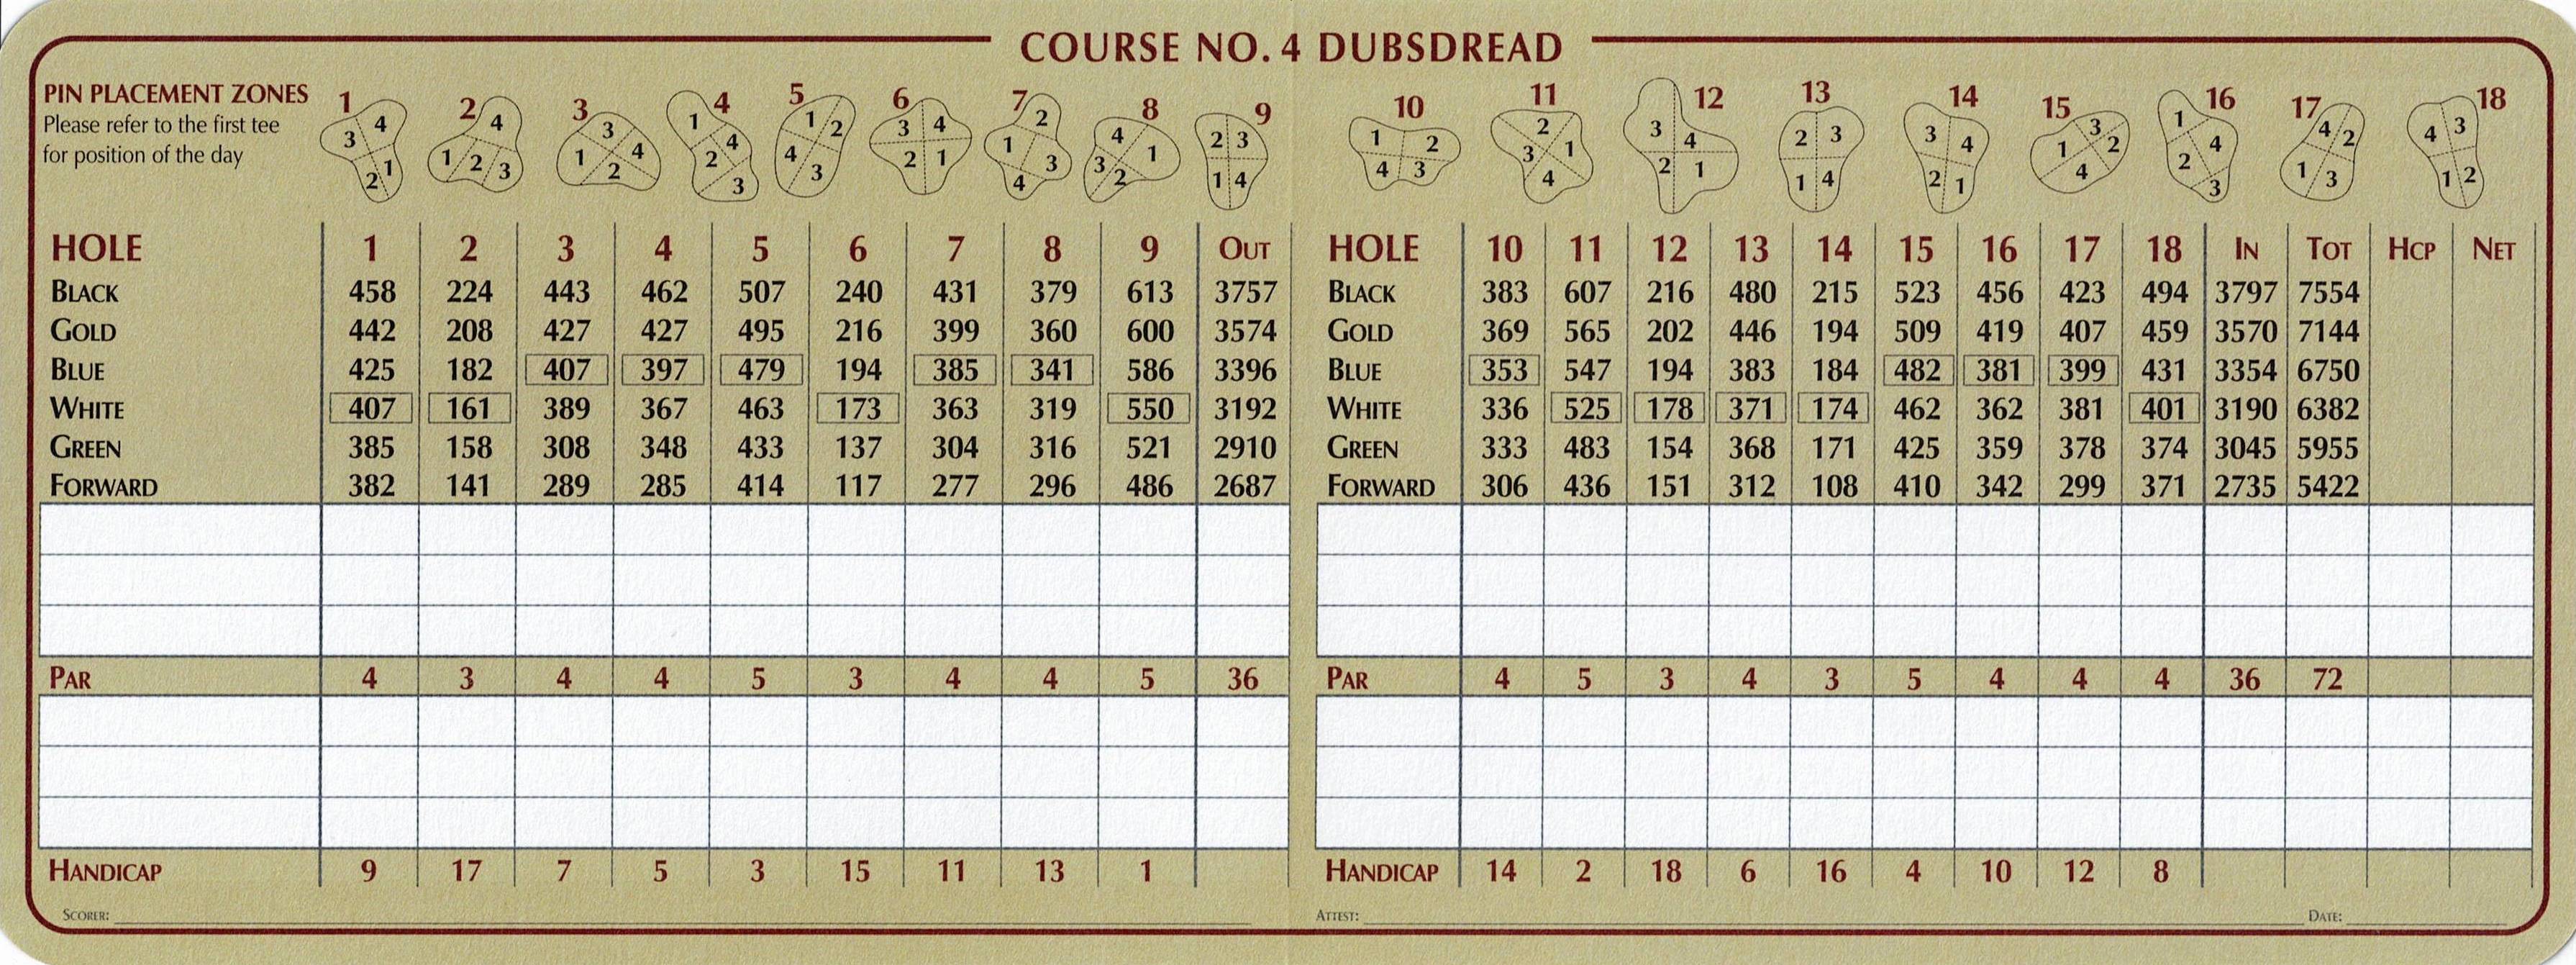 Scan of the scorecard from Cog Hill Course #4 - Dubsdread in Lemont, Illinois. Dubs has two holes over 600 yards from the back tees! A whopping 7,554 yards from Championship distance.